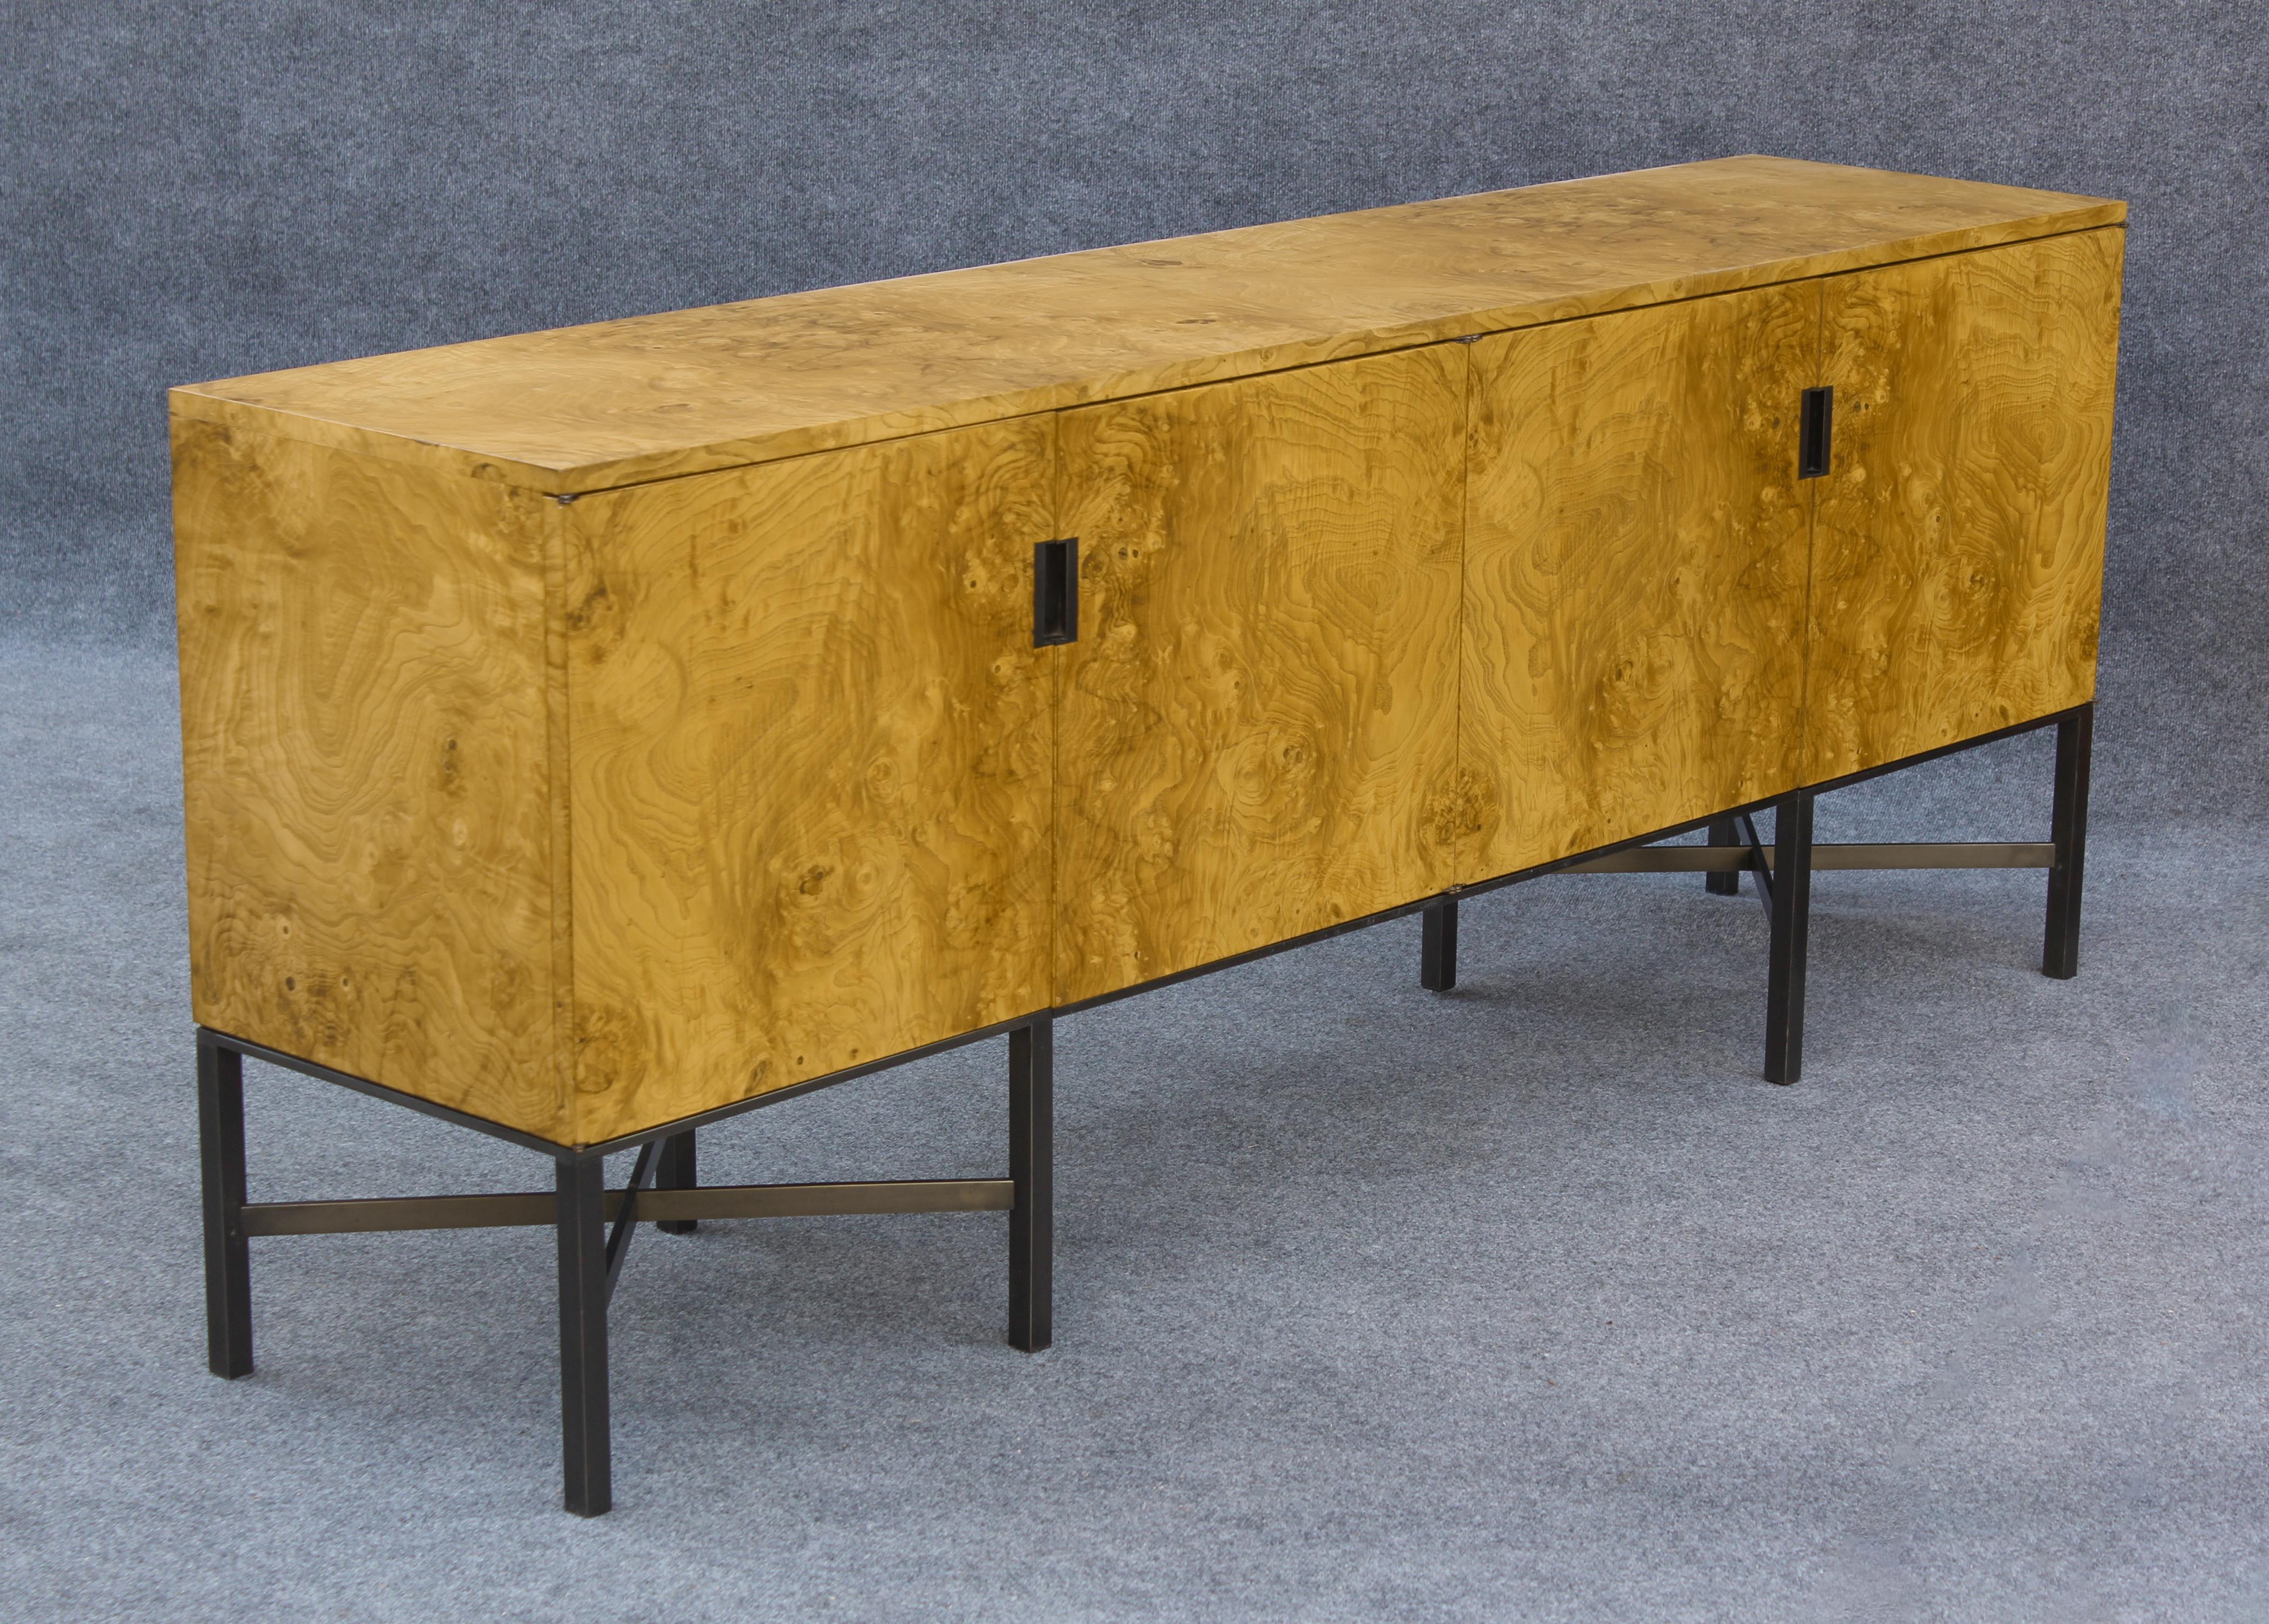 Made in the early 1970s by prestigious American furniture maker Dunbar, this piece was designed by Roger Sprunger, who spent the better part of three decades at Dunbar. Many of Dunbar's most successful pieces were designed by Sprunger. He is now